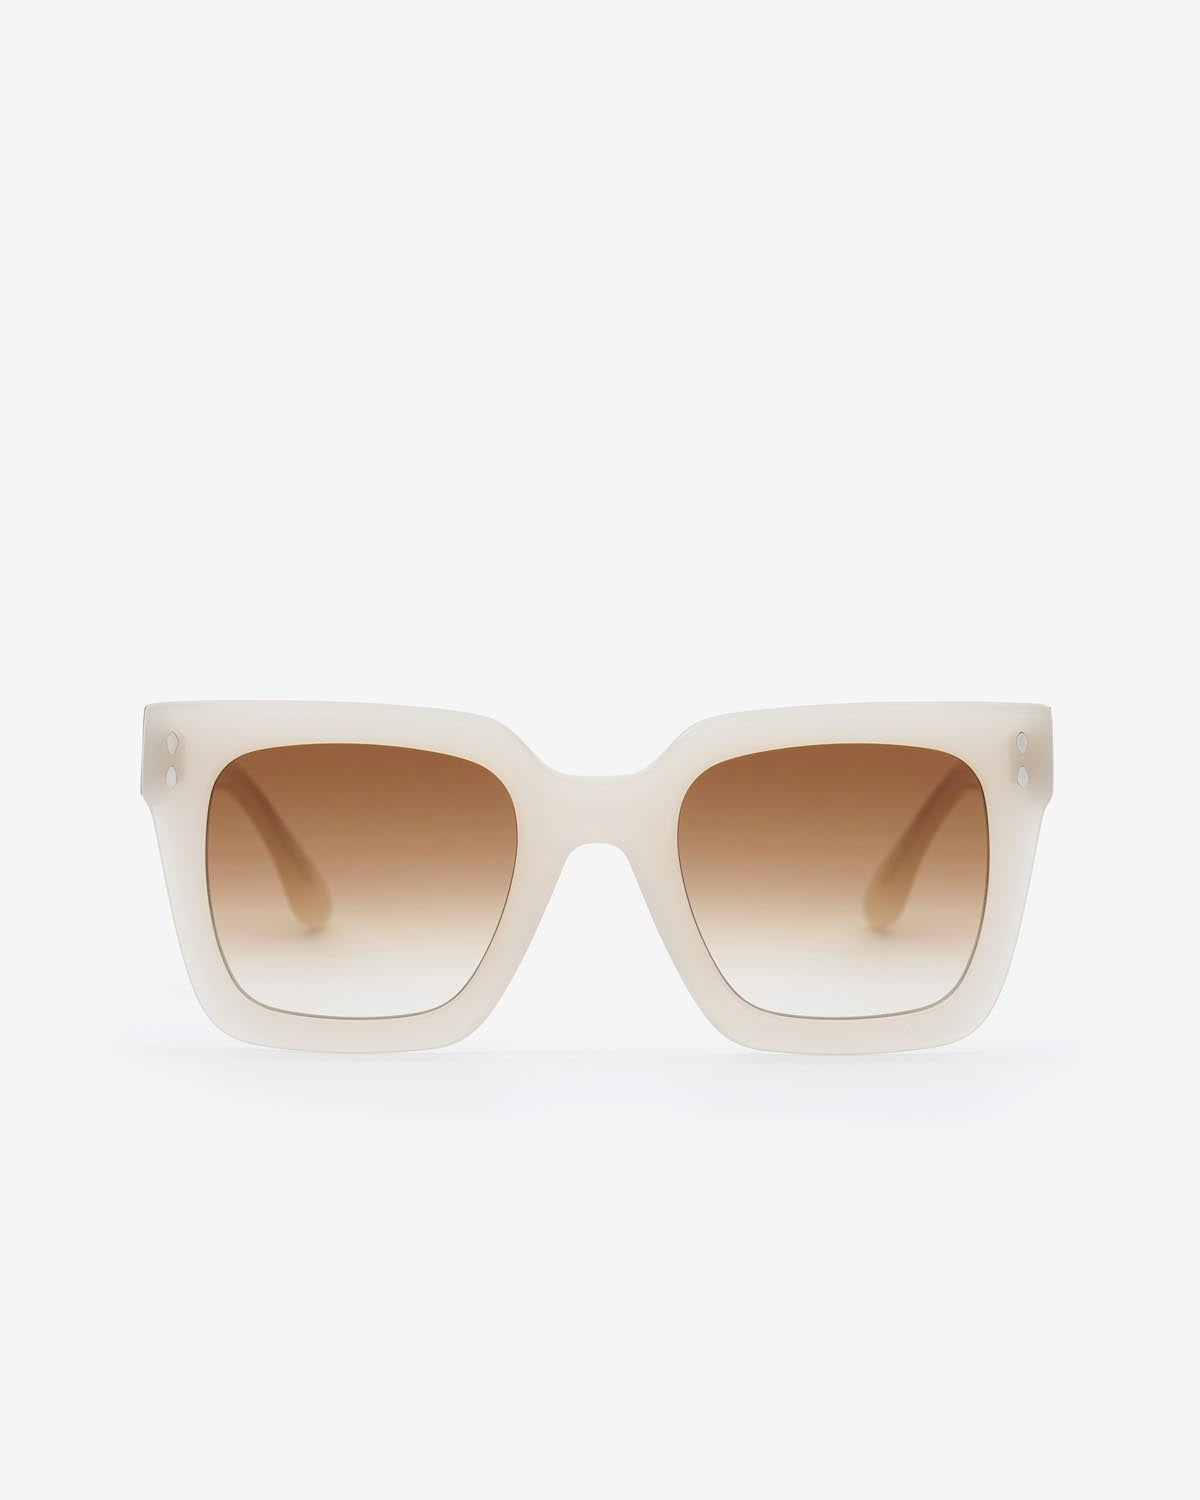 Sonnenbrille ekly Woman Ivory-brown shaded 2